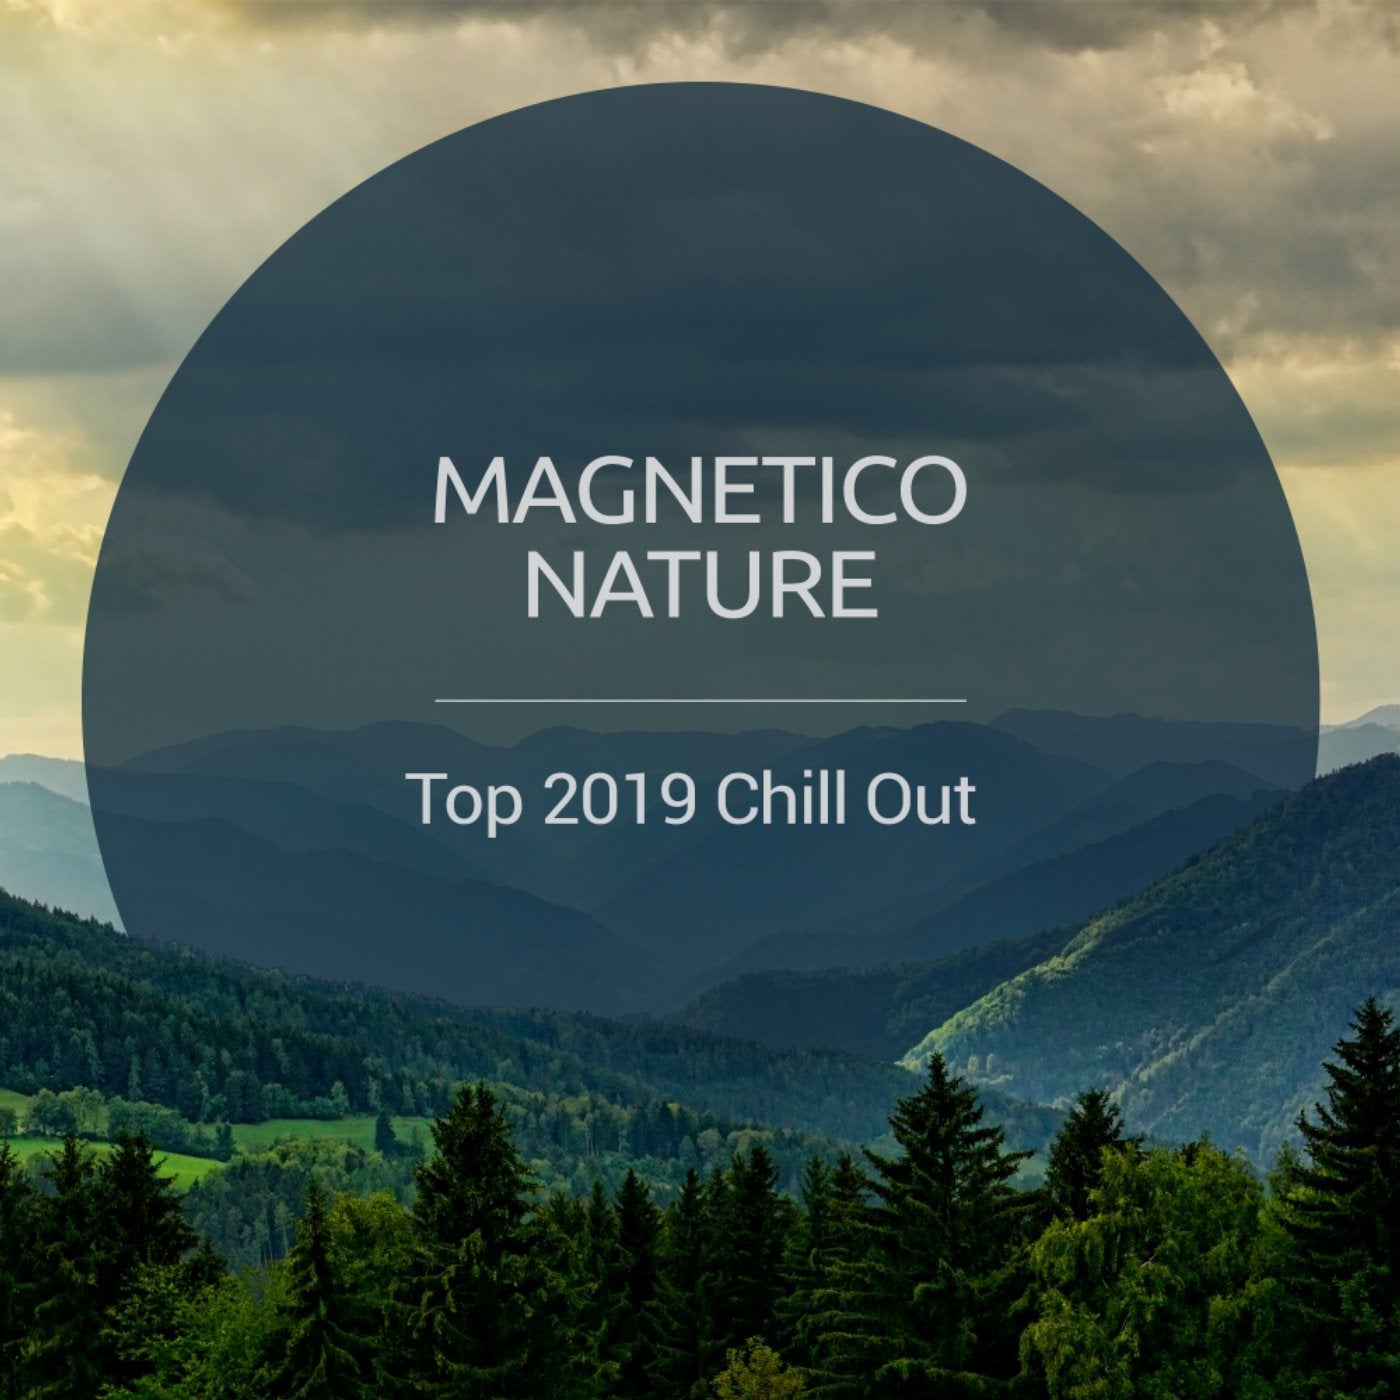 Top 2019 Chill Out